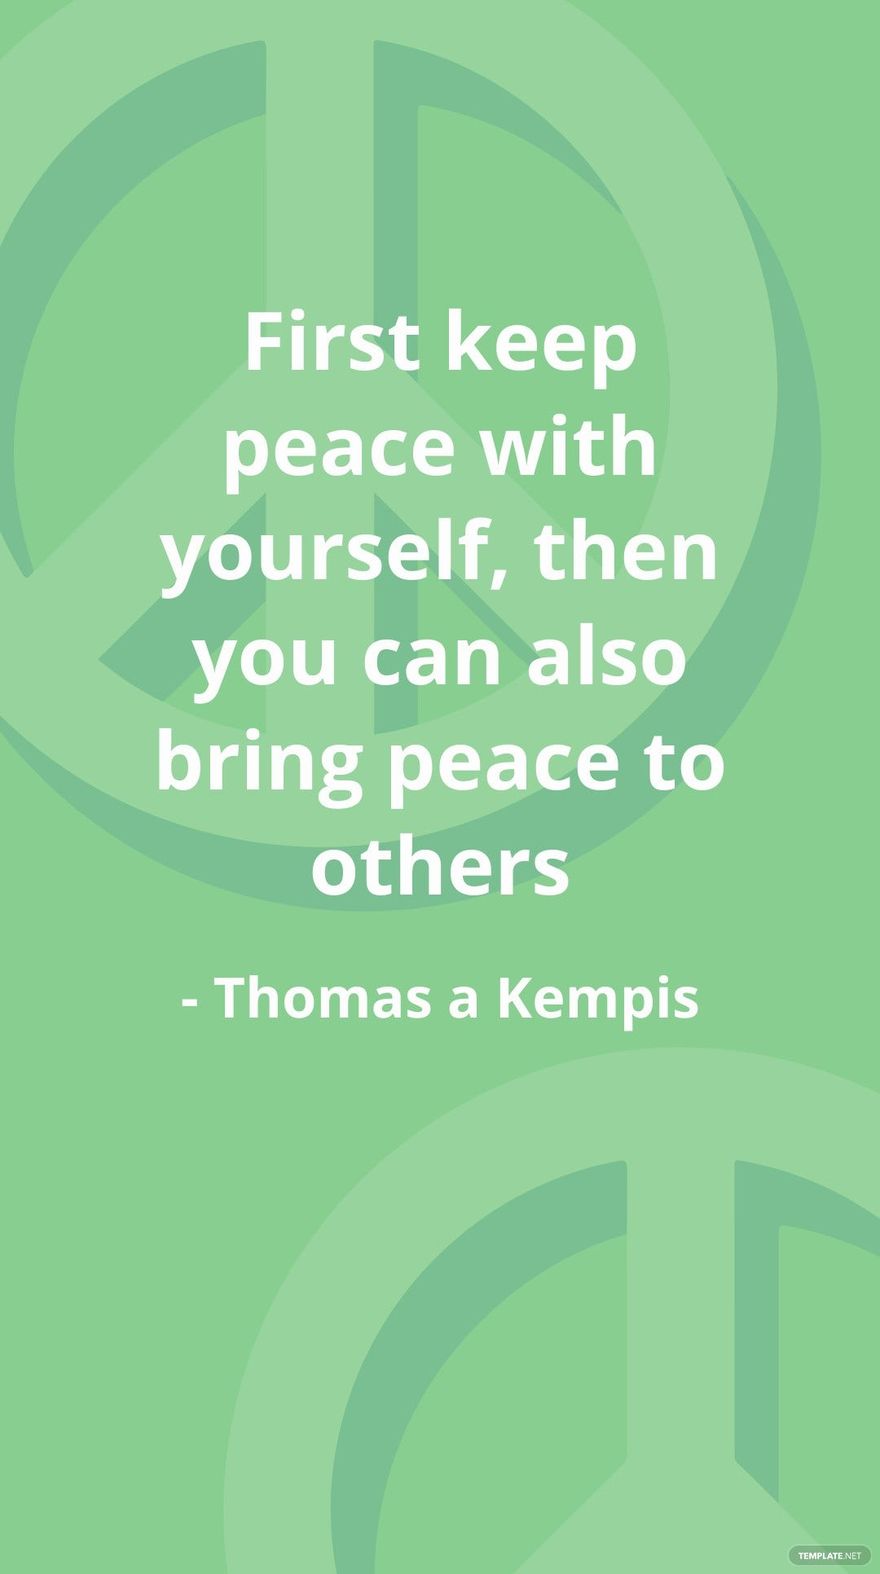 Free Thomas a Kempis - First keep peace with yourself, then you can also bring peace to others in JPG